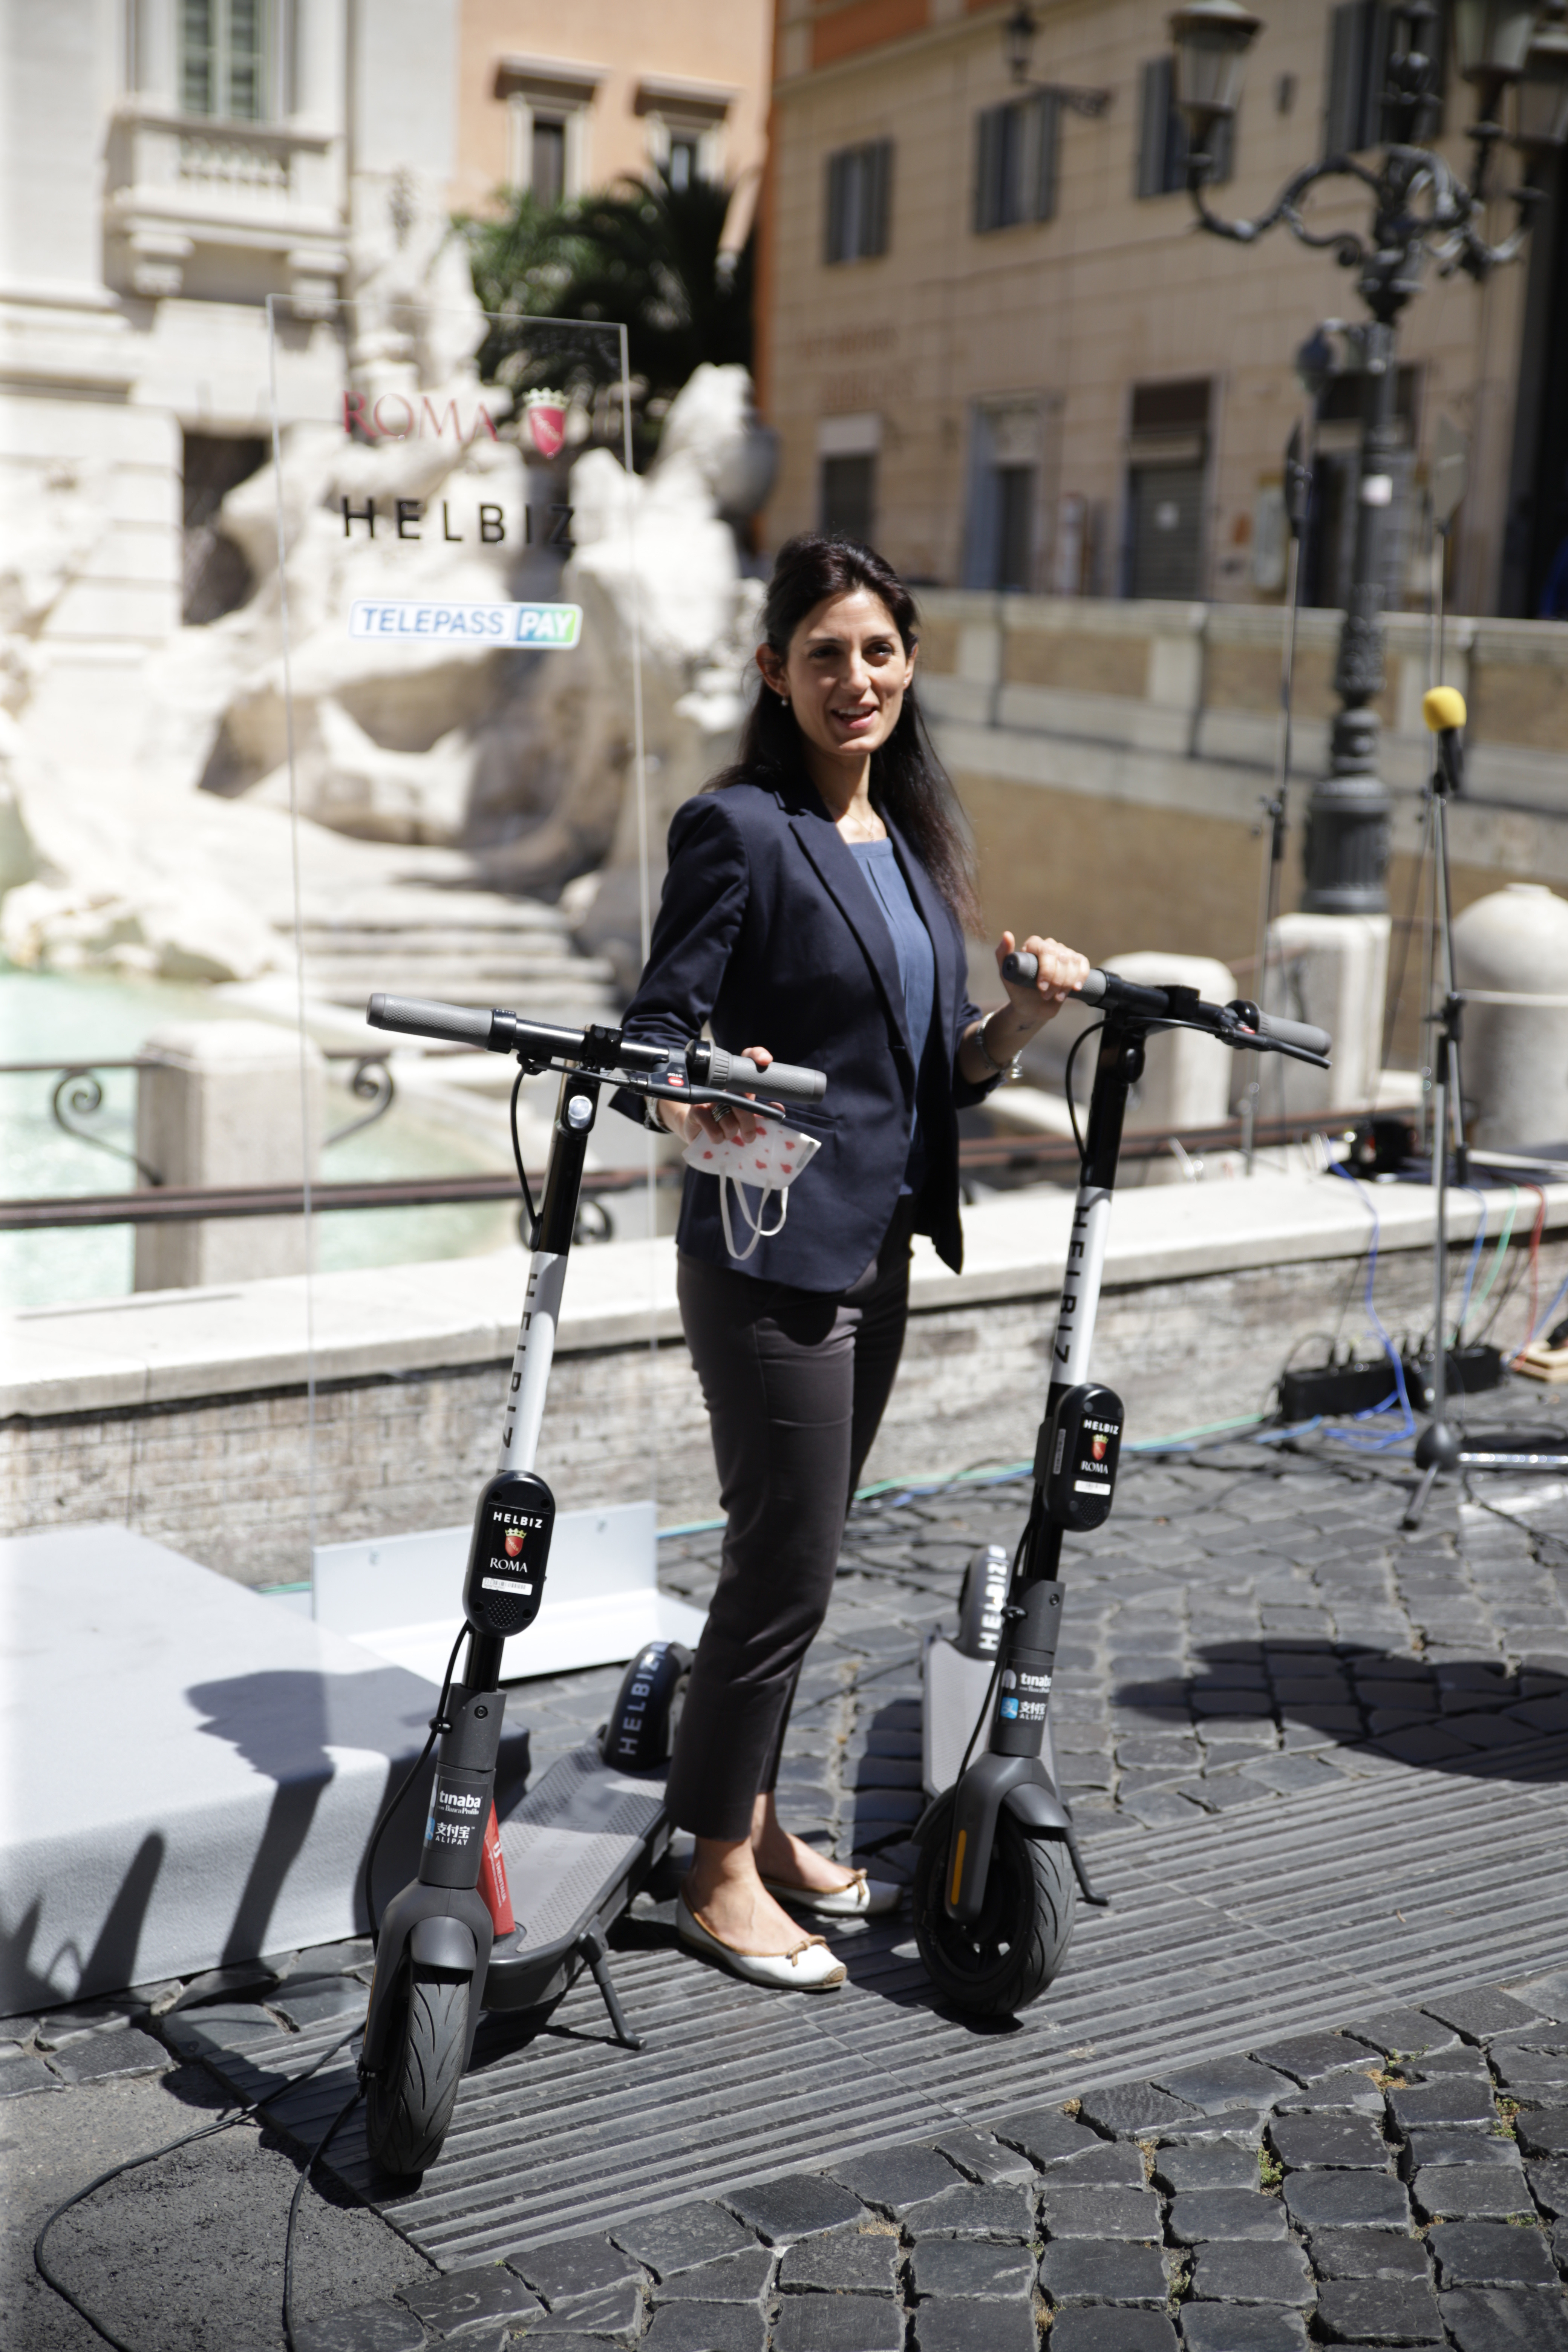 fælde Give Tectonic As Italy Opens its Doors to the World, Helbiz Launches the First Electric  Scooters in Rome | Business Wire